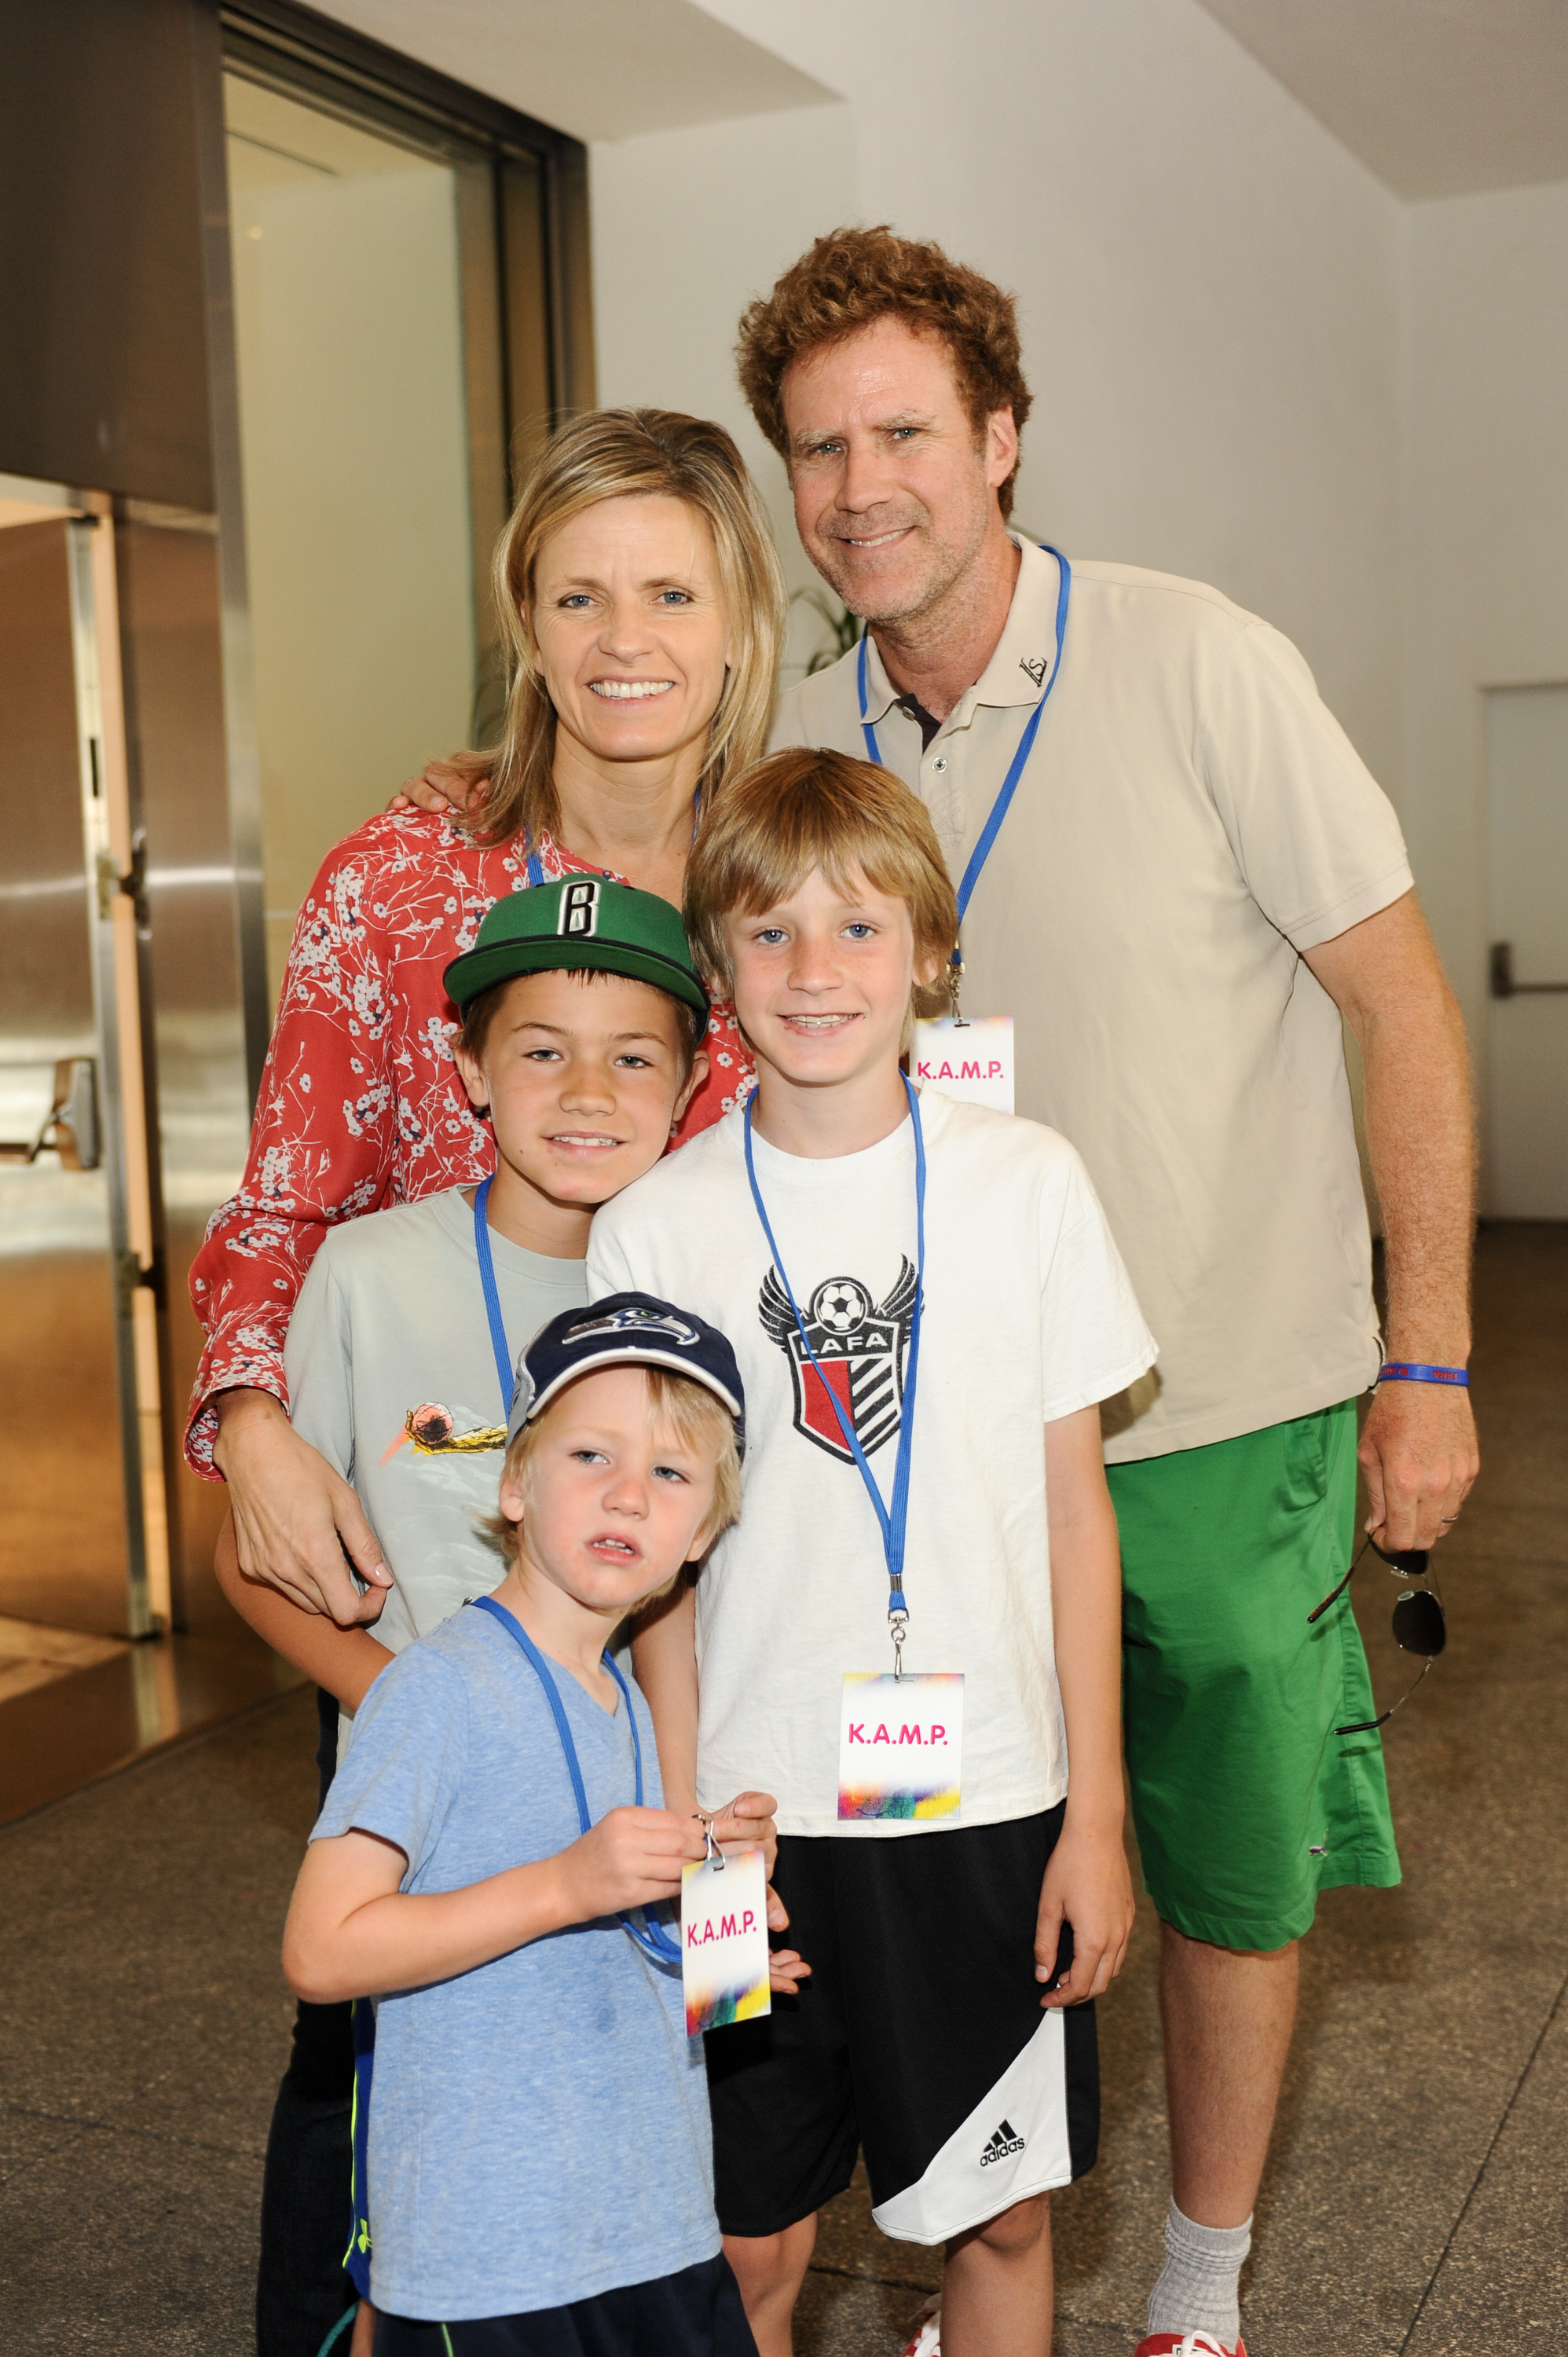 Will Ferrell and Viveca Paulin with their children Mattias, Axel, and Magnus in Los Angeles in 2014. | Source: Getty Images